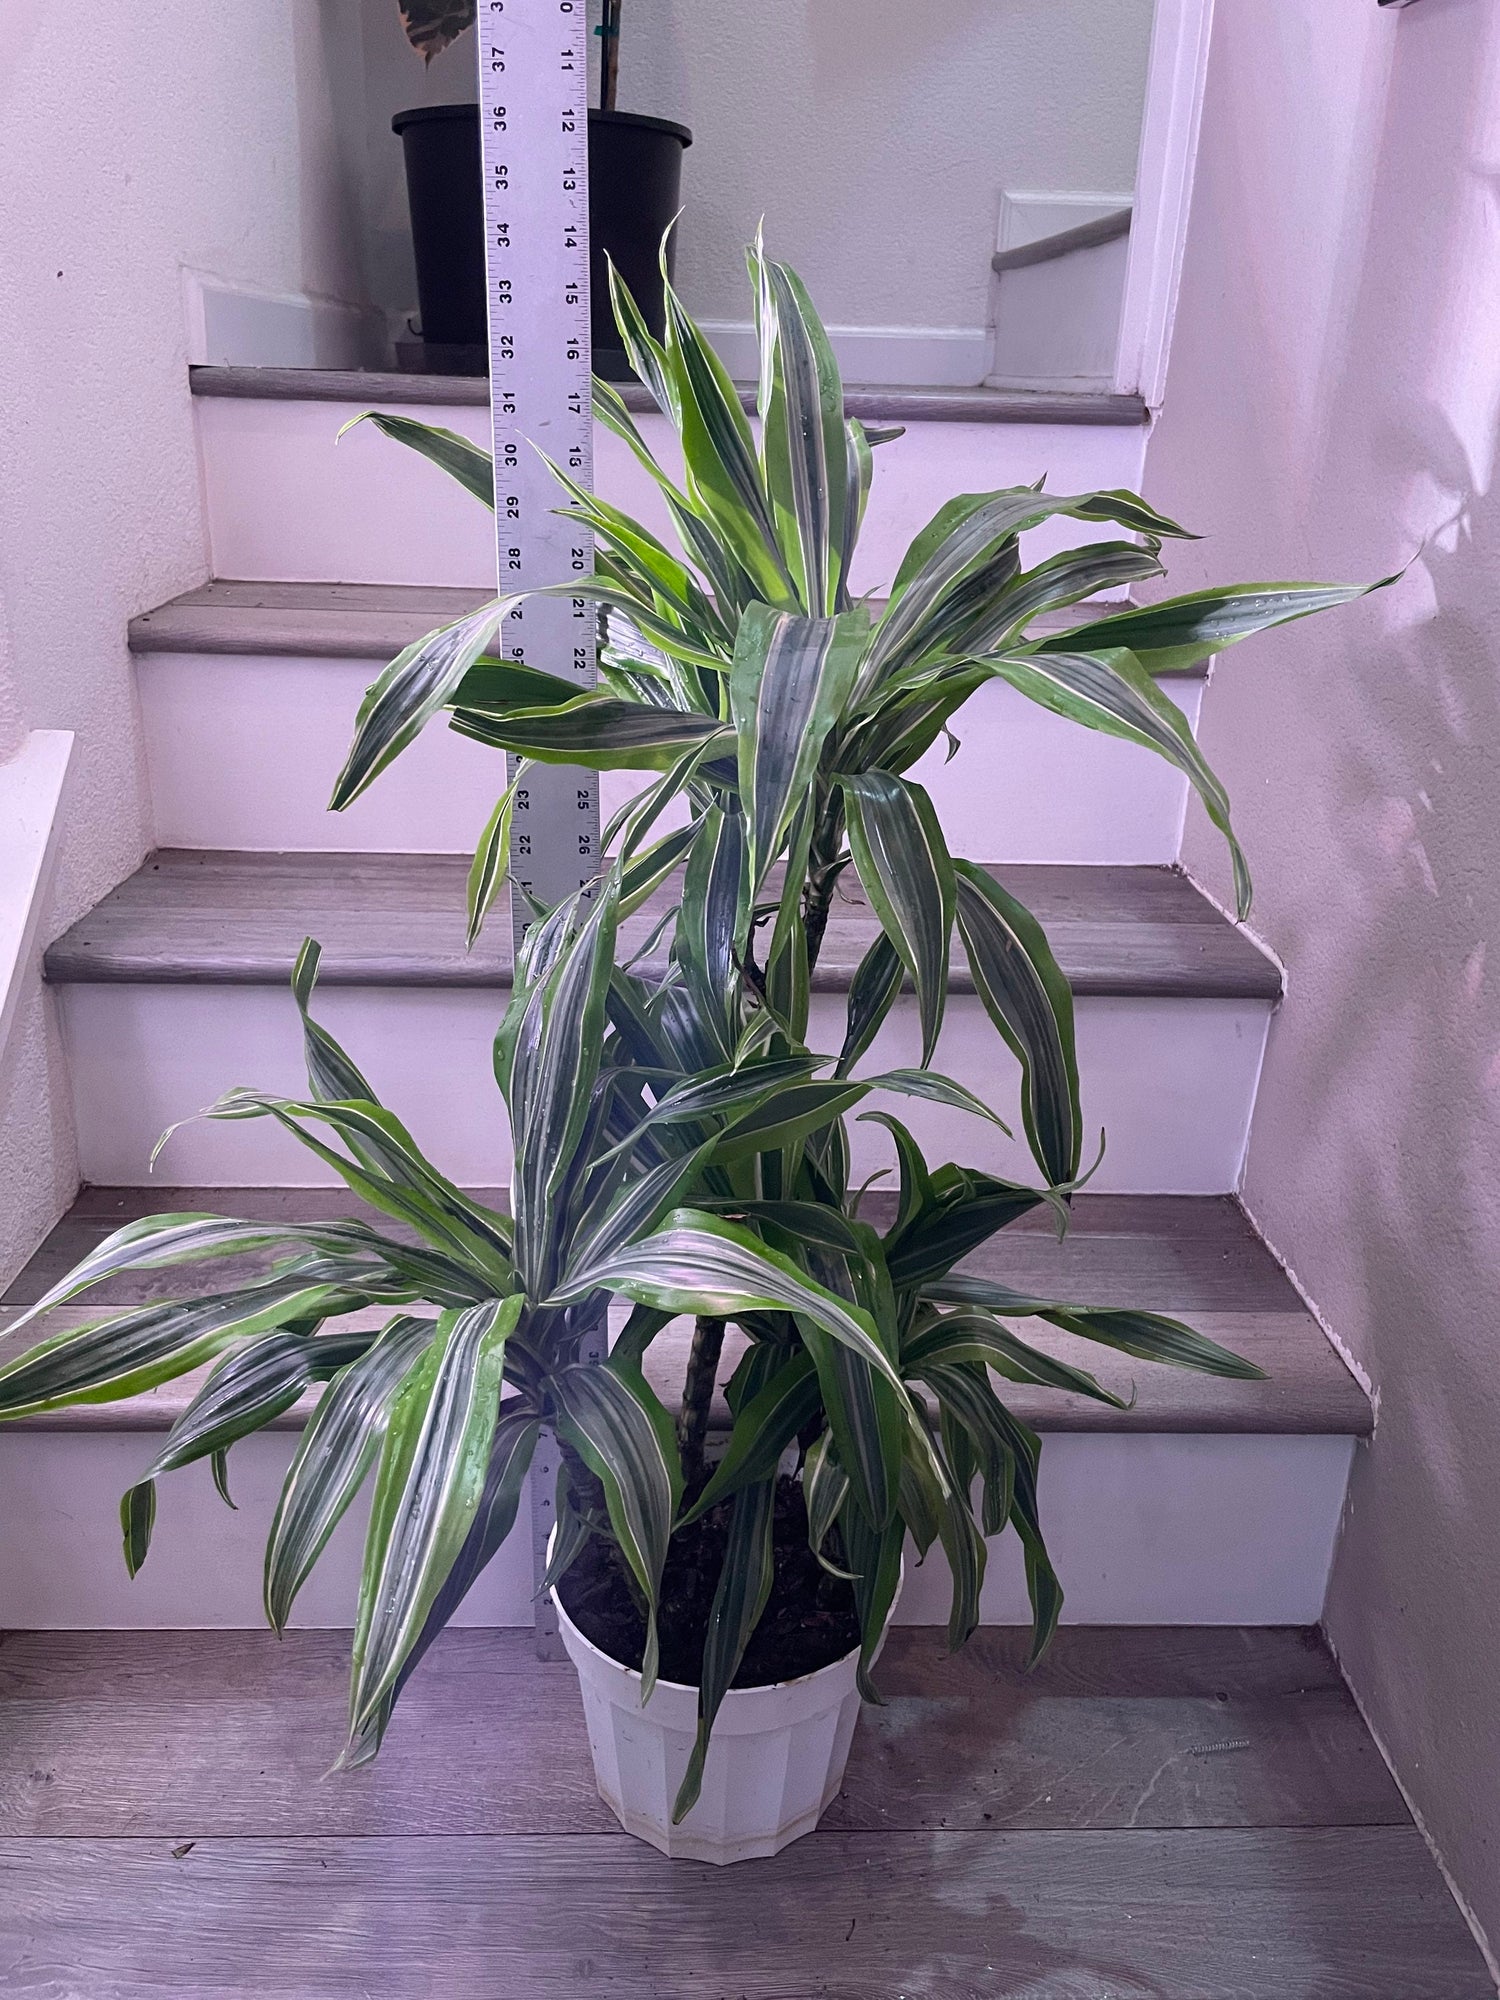 3 ft tall- hard to find this size -Warneckii Dracaena (Dracaena fragrans ‘Warneckii’)-east care -low light -air purifier